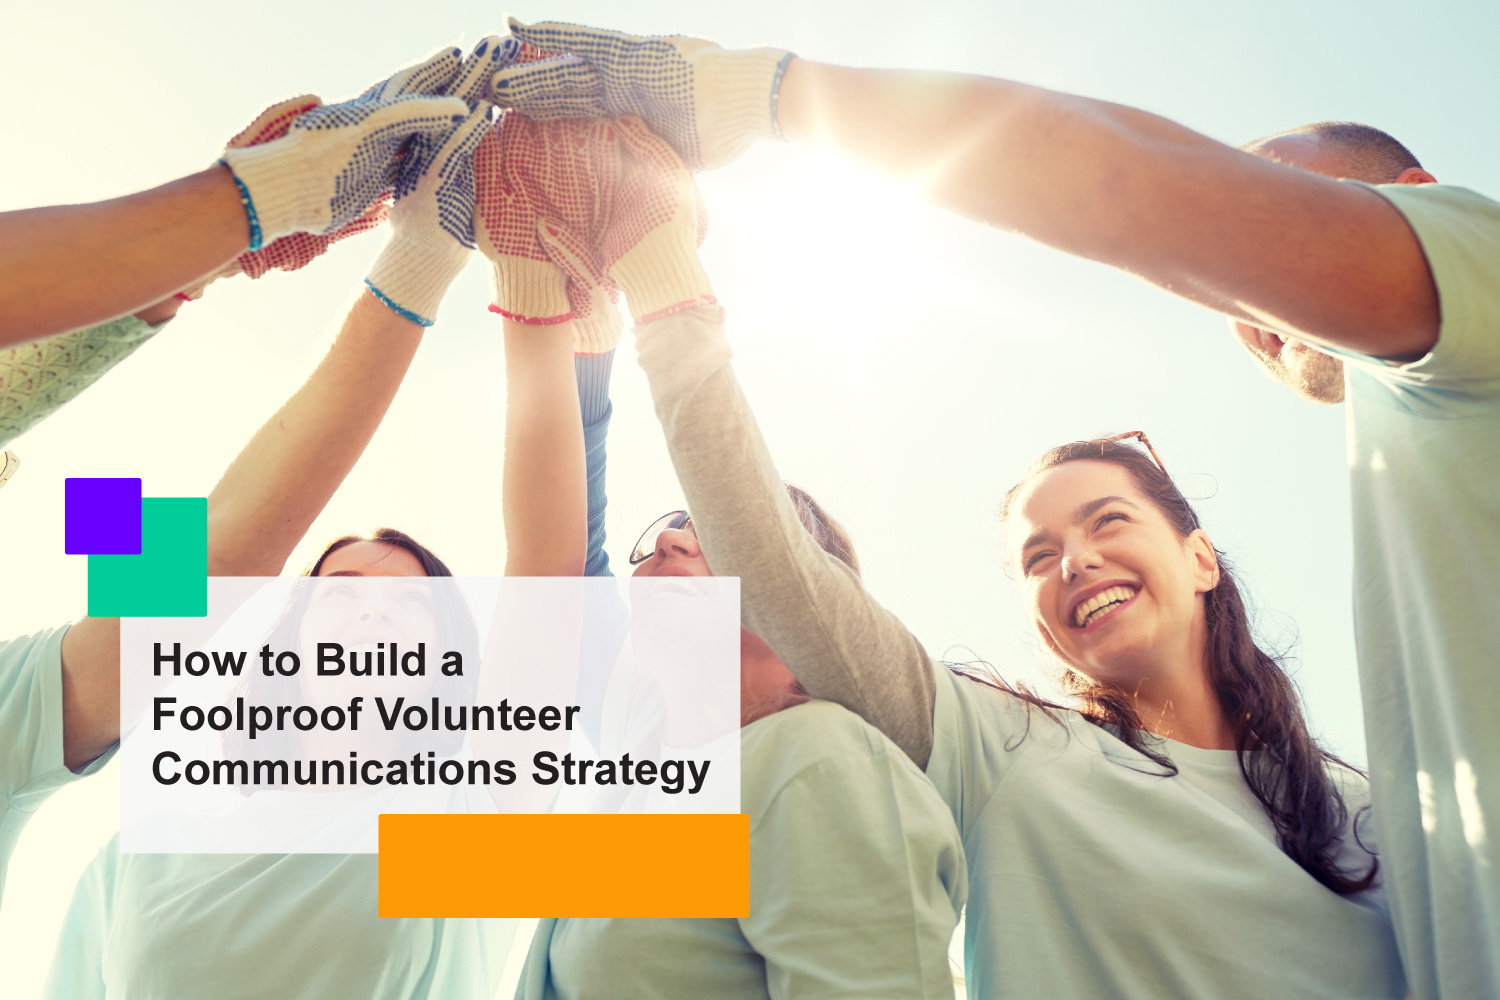 How to Build a Foolproof Volunteer Communications Strategy